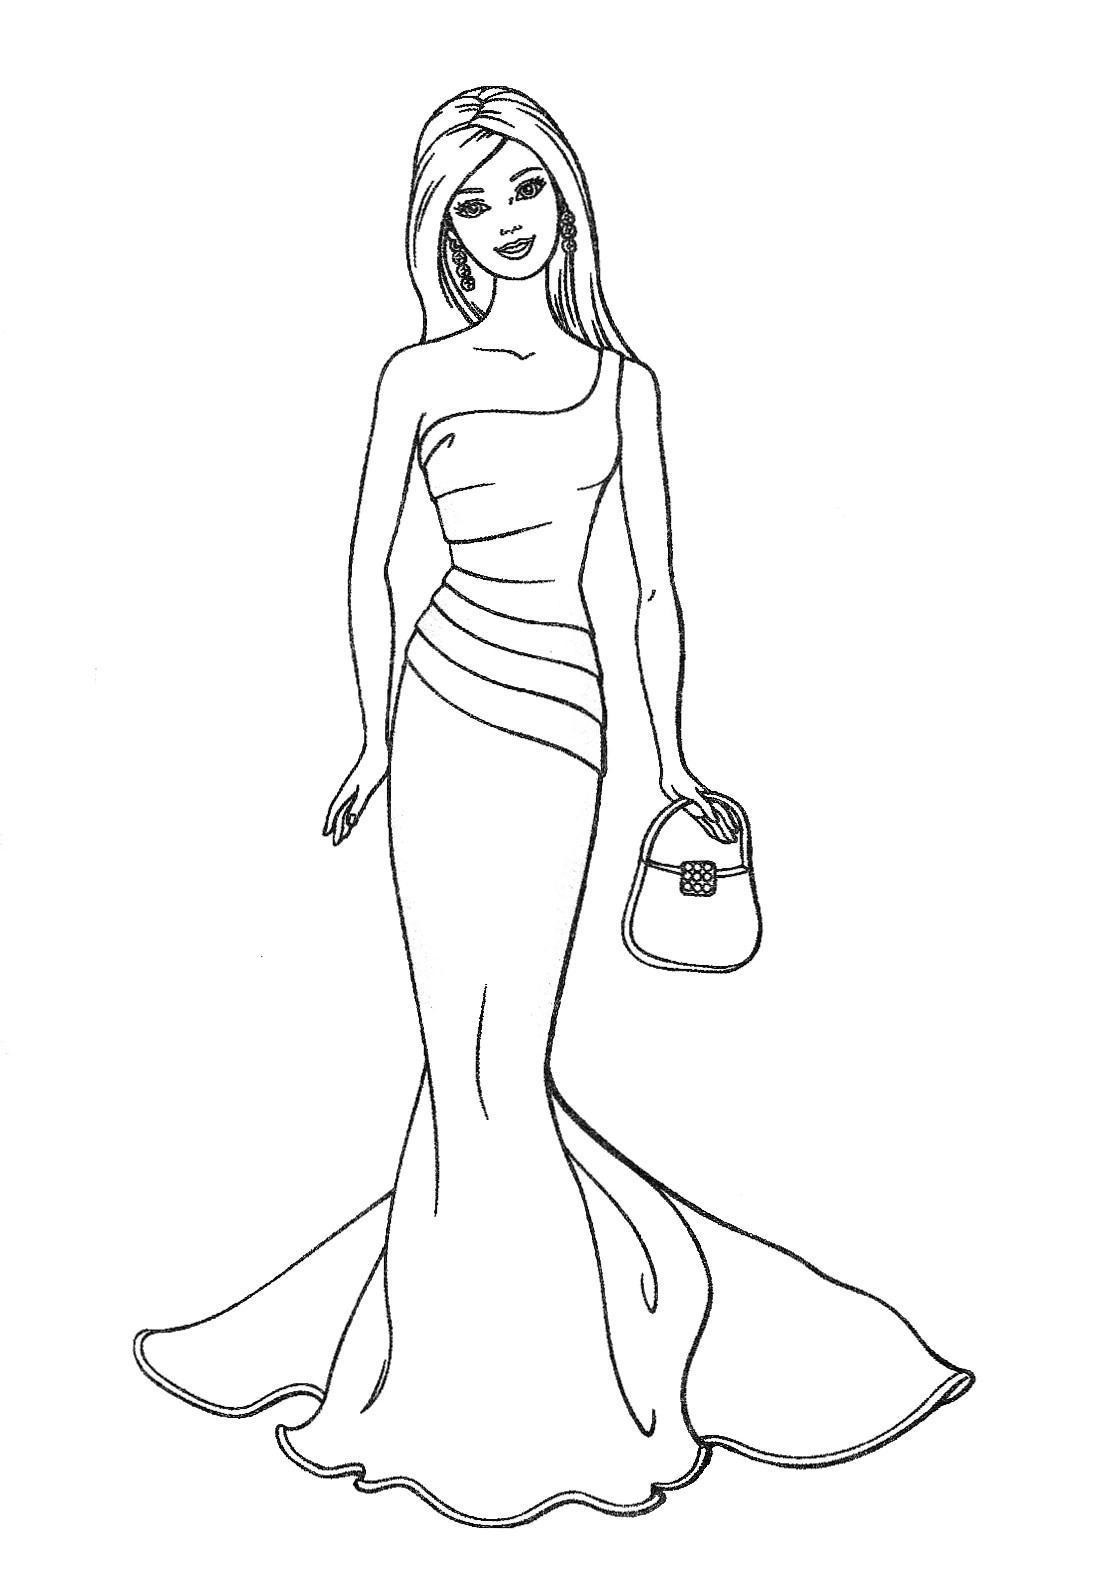 Printable Barbie Coloring Pages
 BARBIE COLORING PAGES